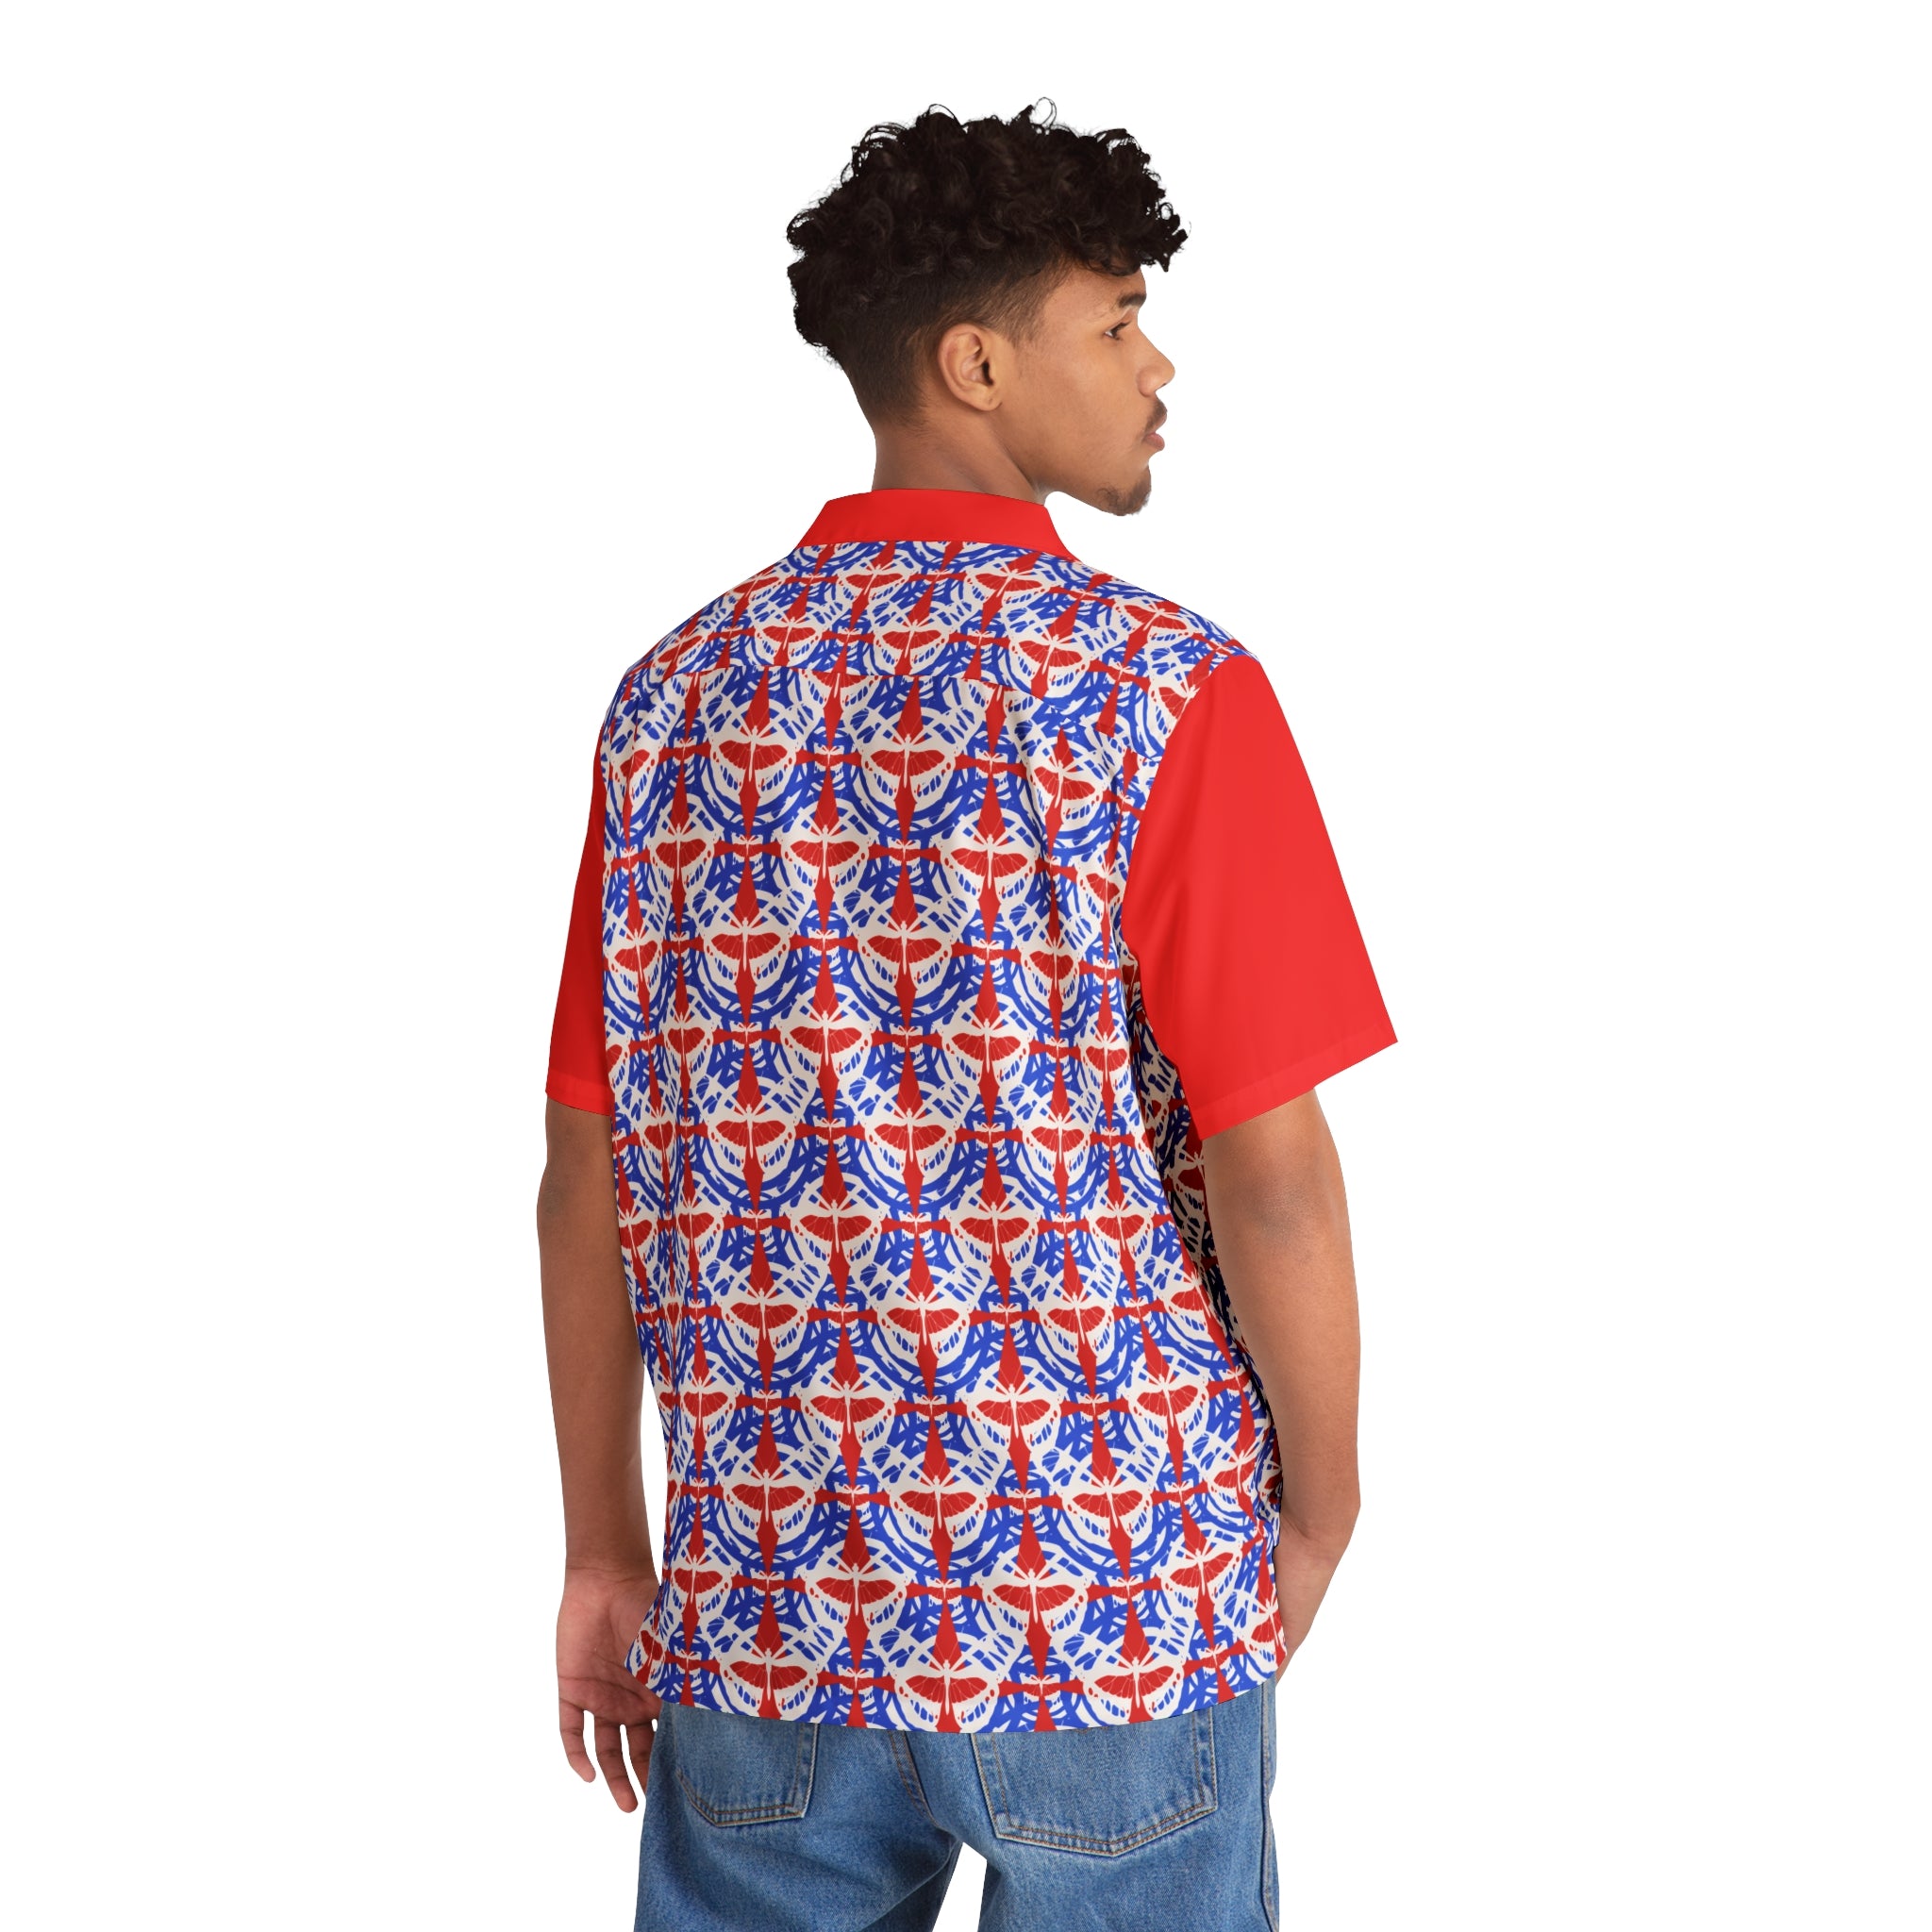 Red White and Blue Men's Printed Hawaiian Shirt up to 5XL - Shell Design Boutique